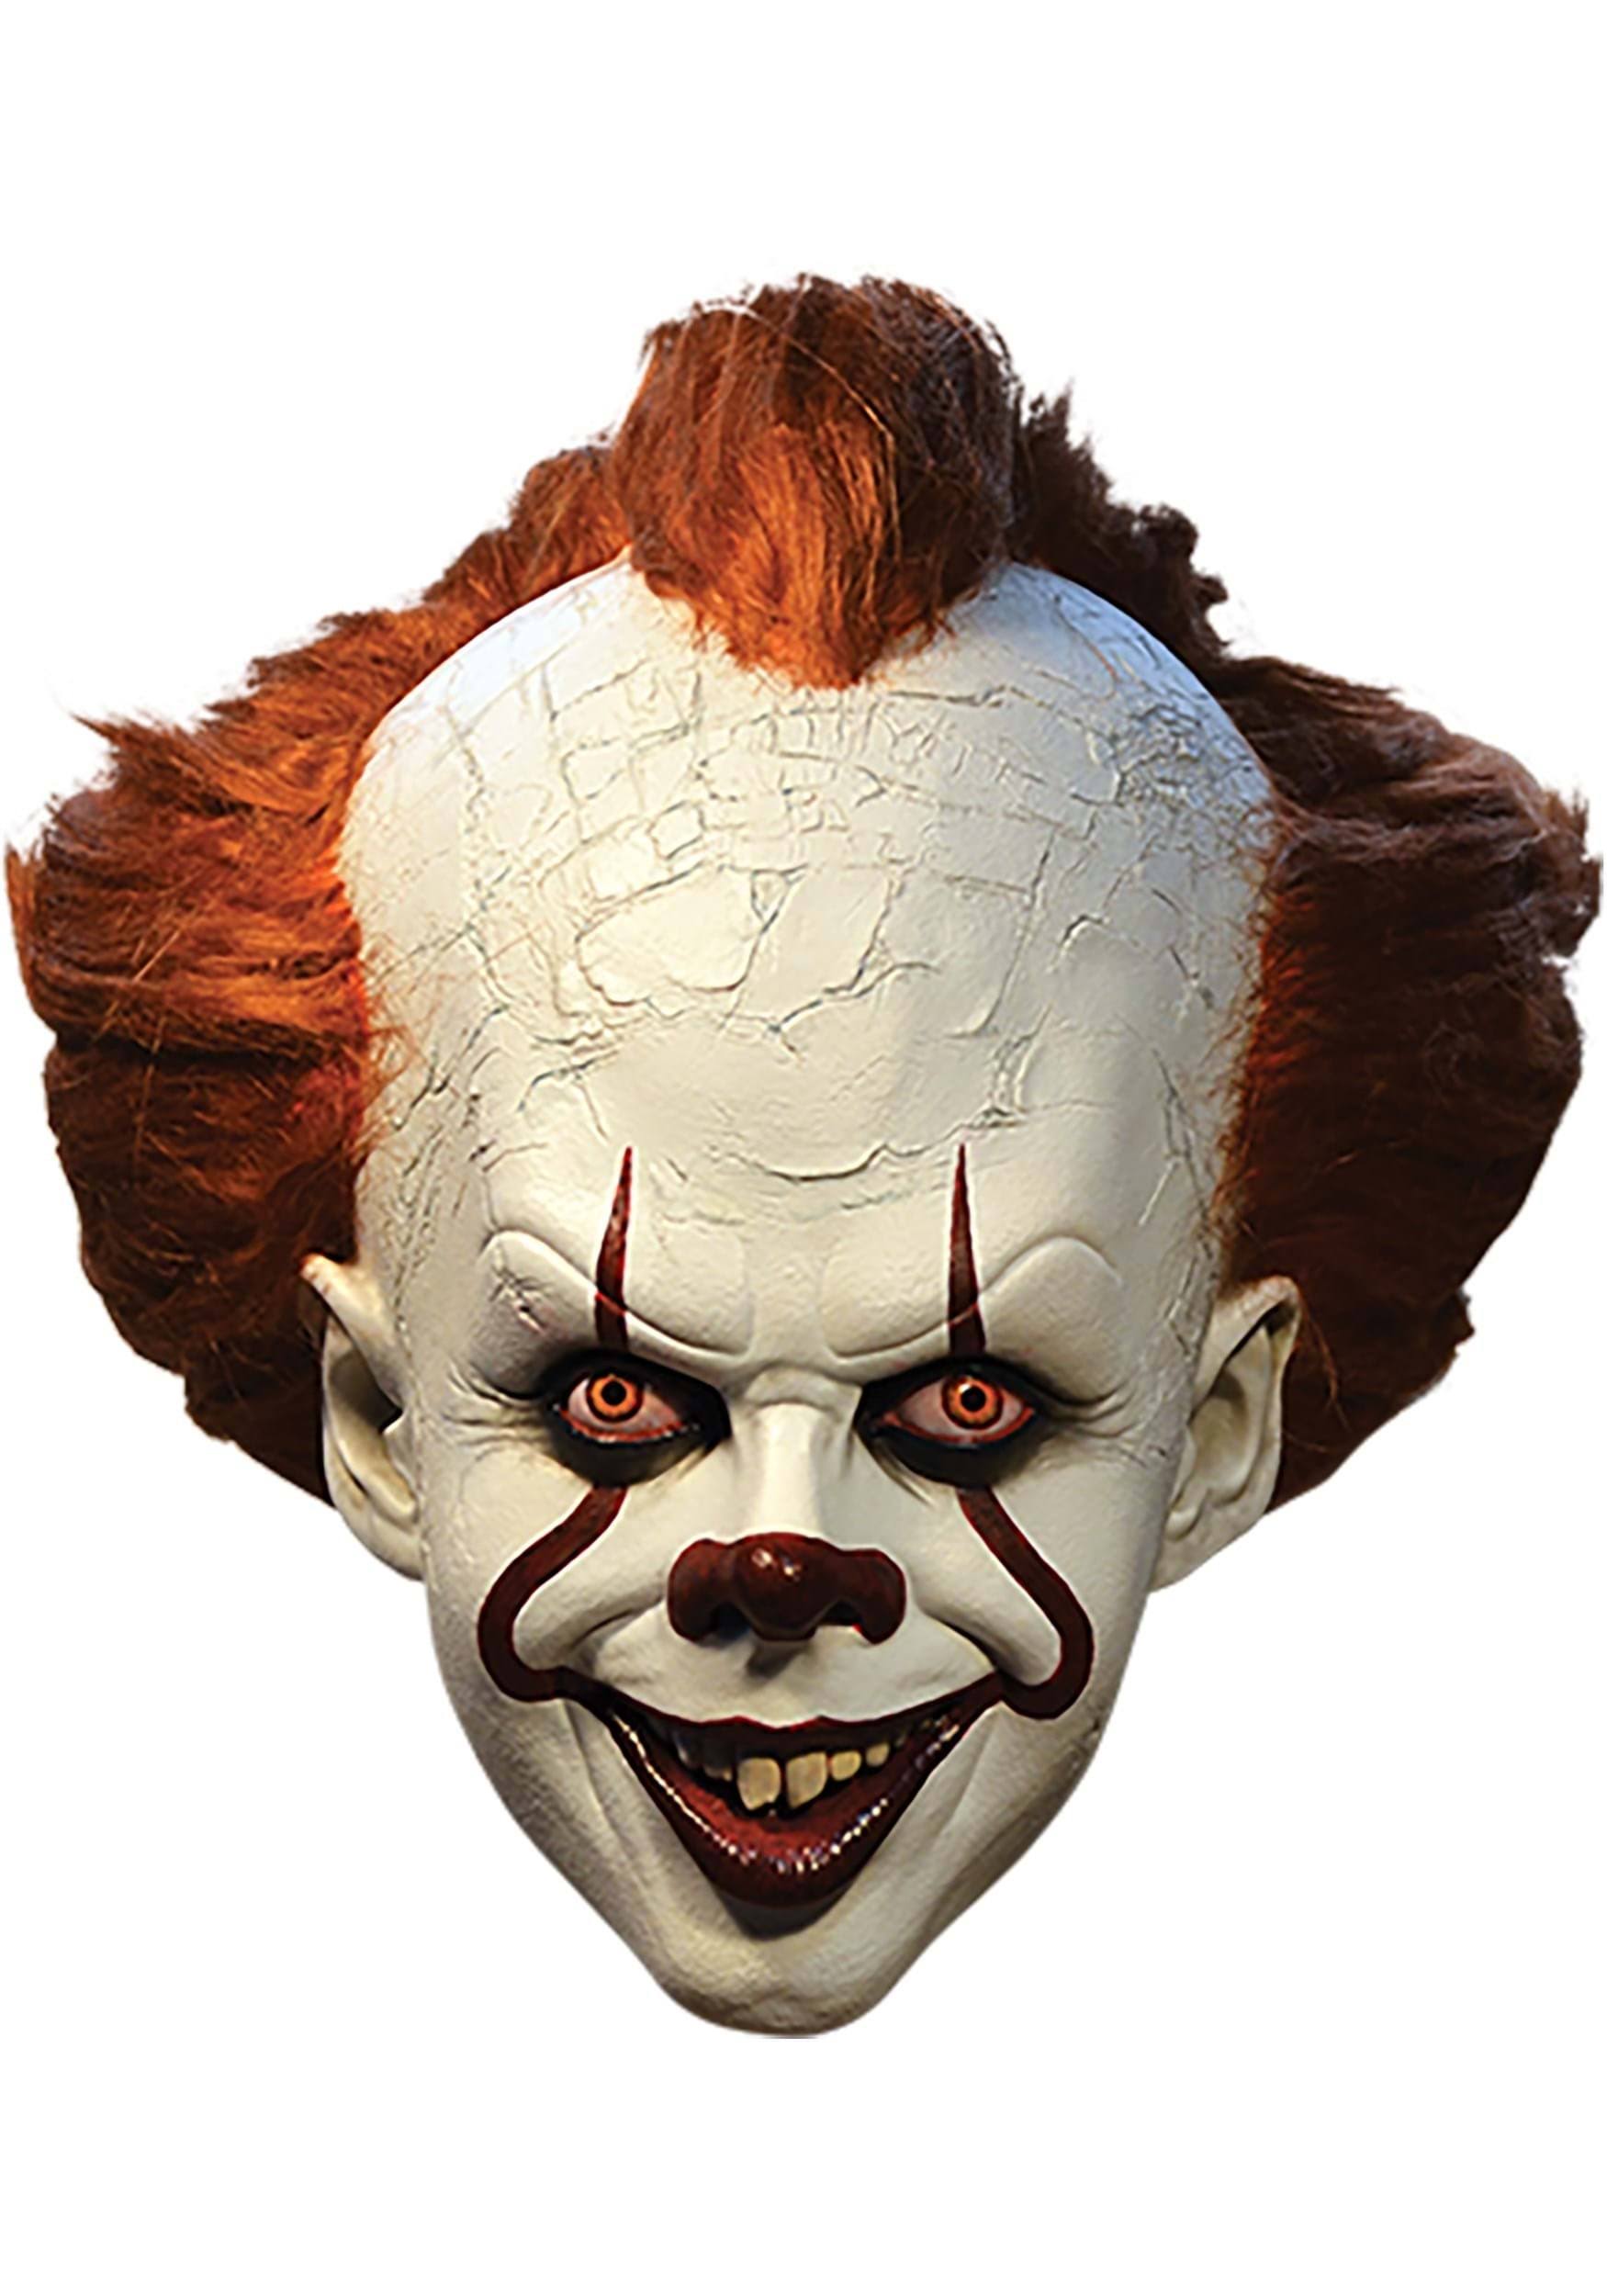 It - Deluxe Pennywise Mask